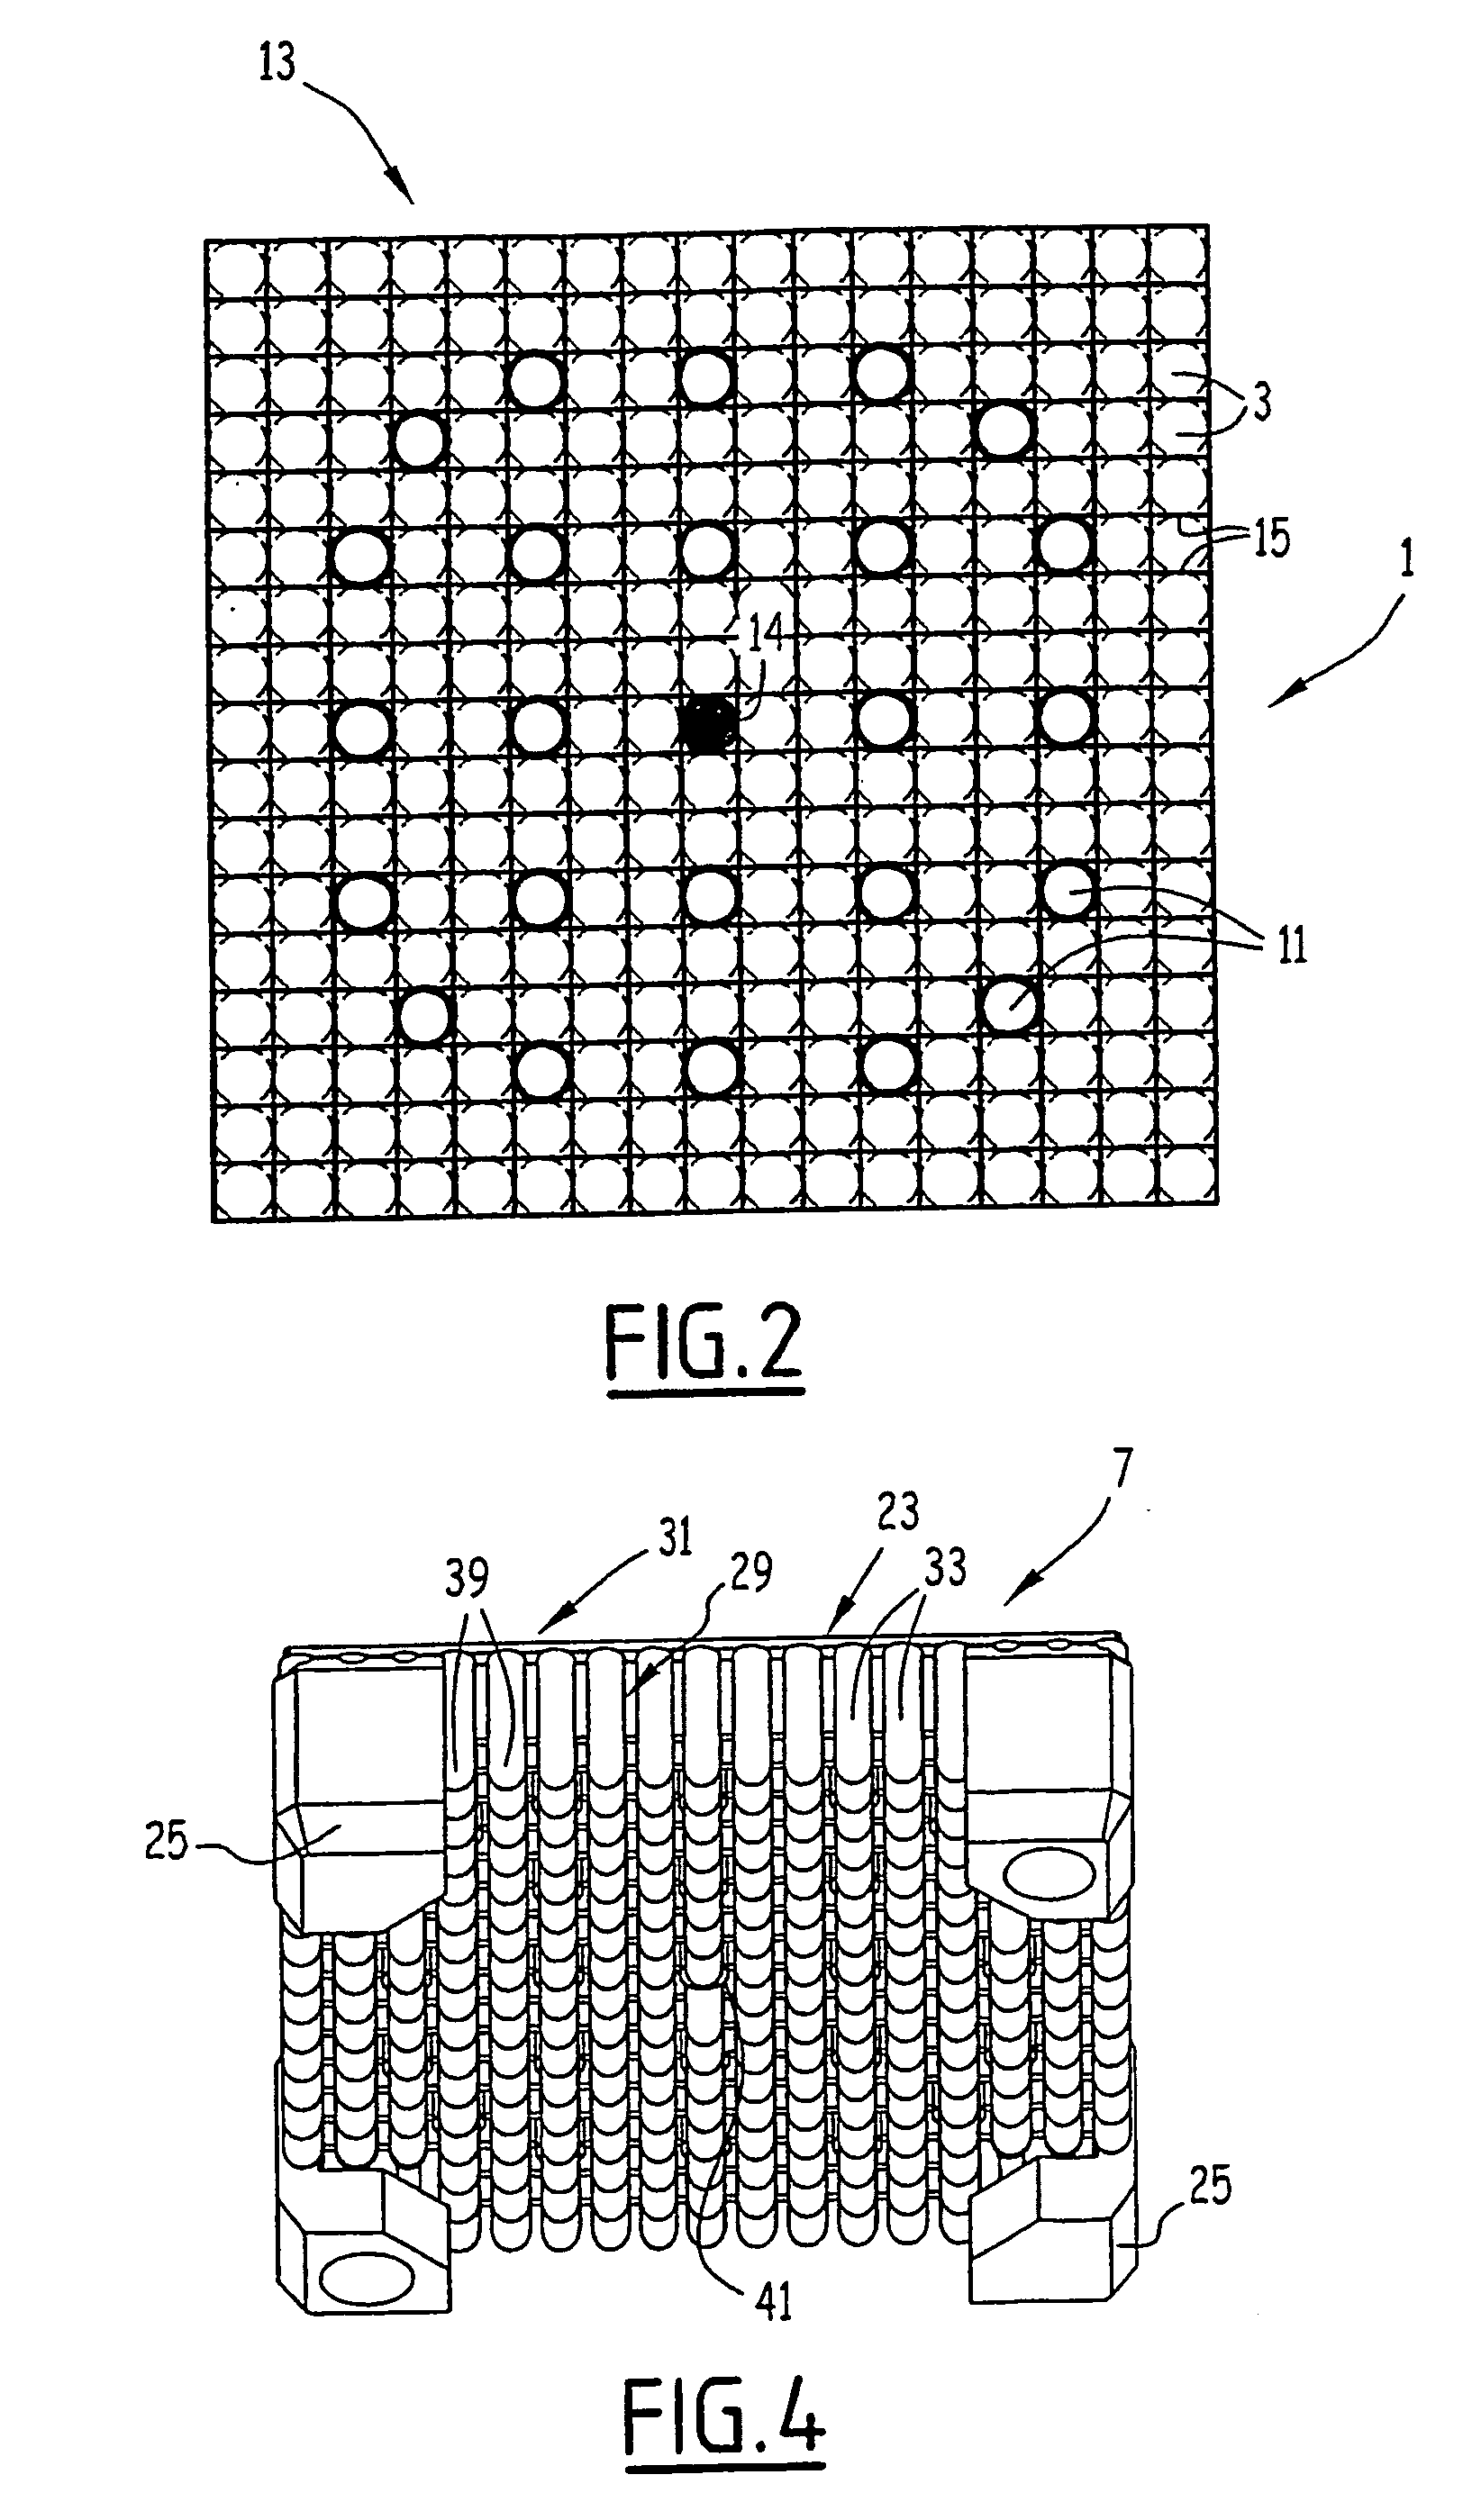 Terminal end-piece for a fuel assembly having a nose for orienting the flow of coolant fluid and corresponding assembly